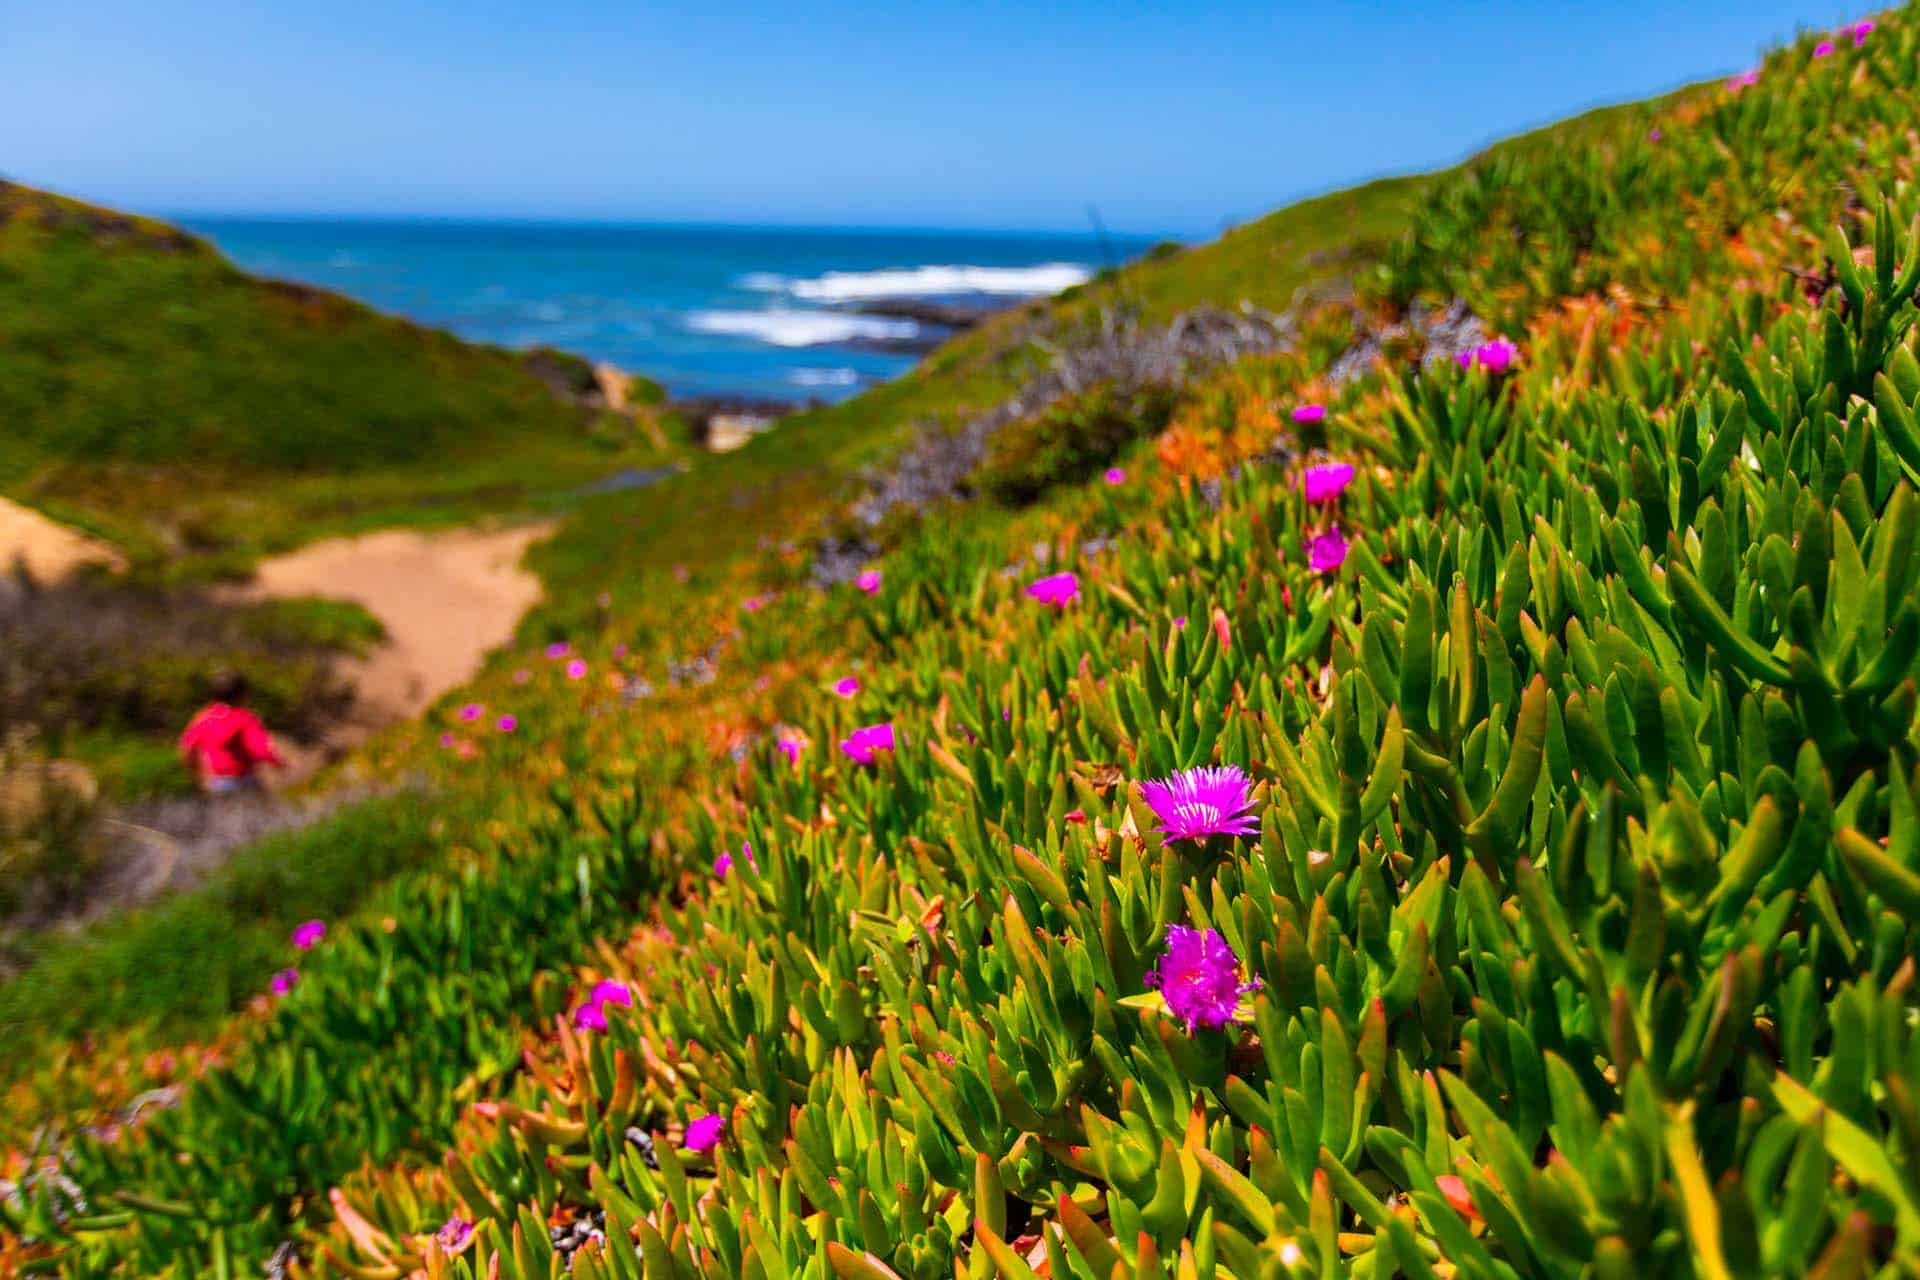 Wildflowers on a hill with a view to the ocean